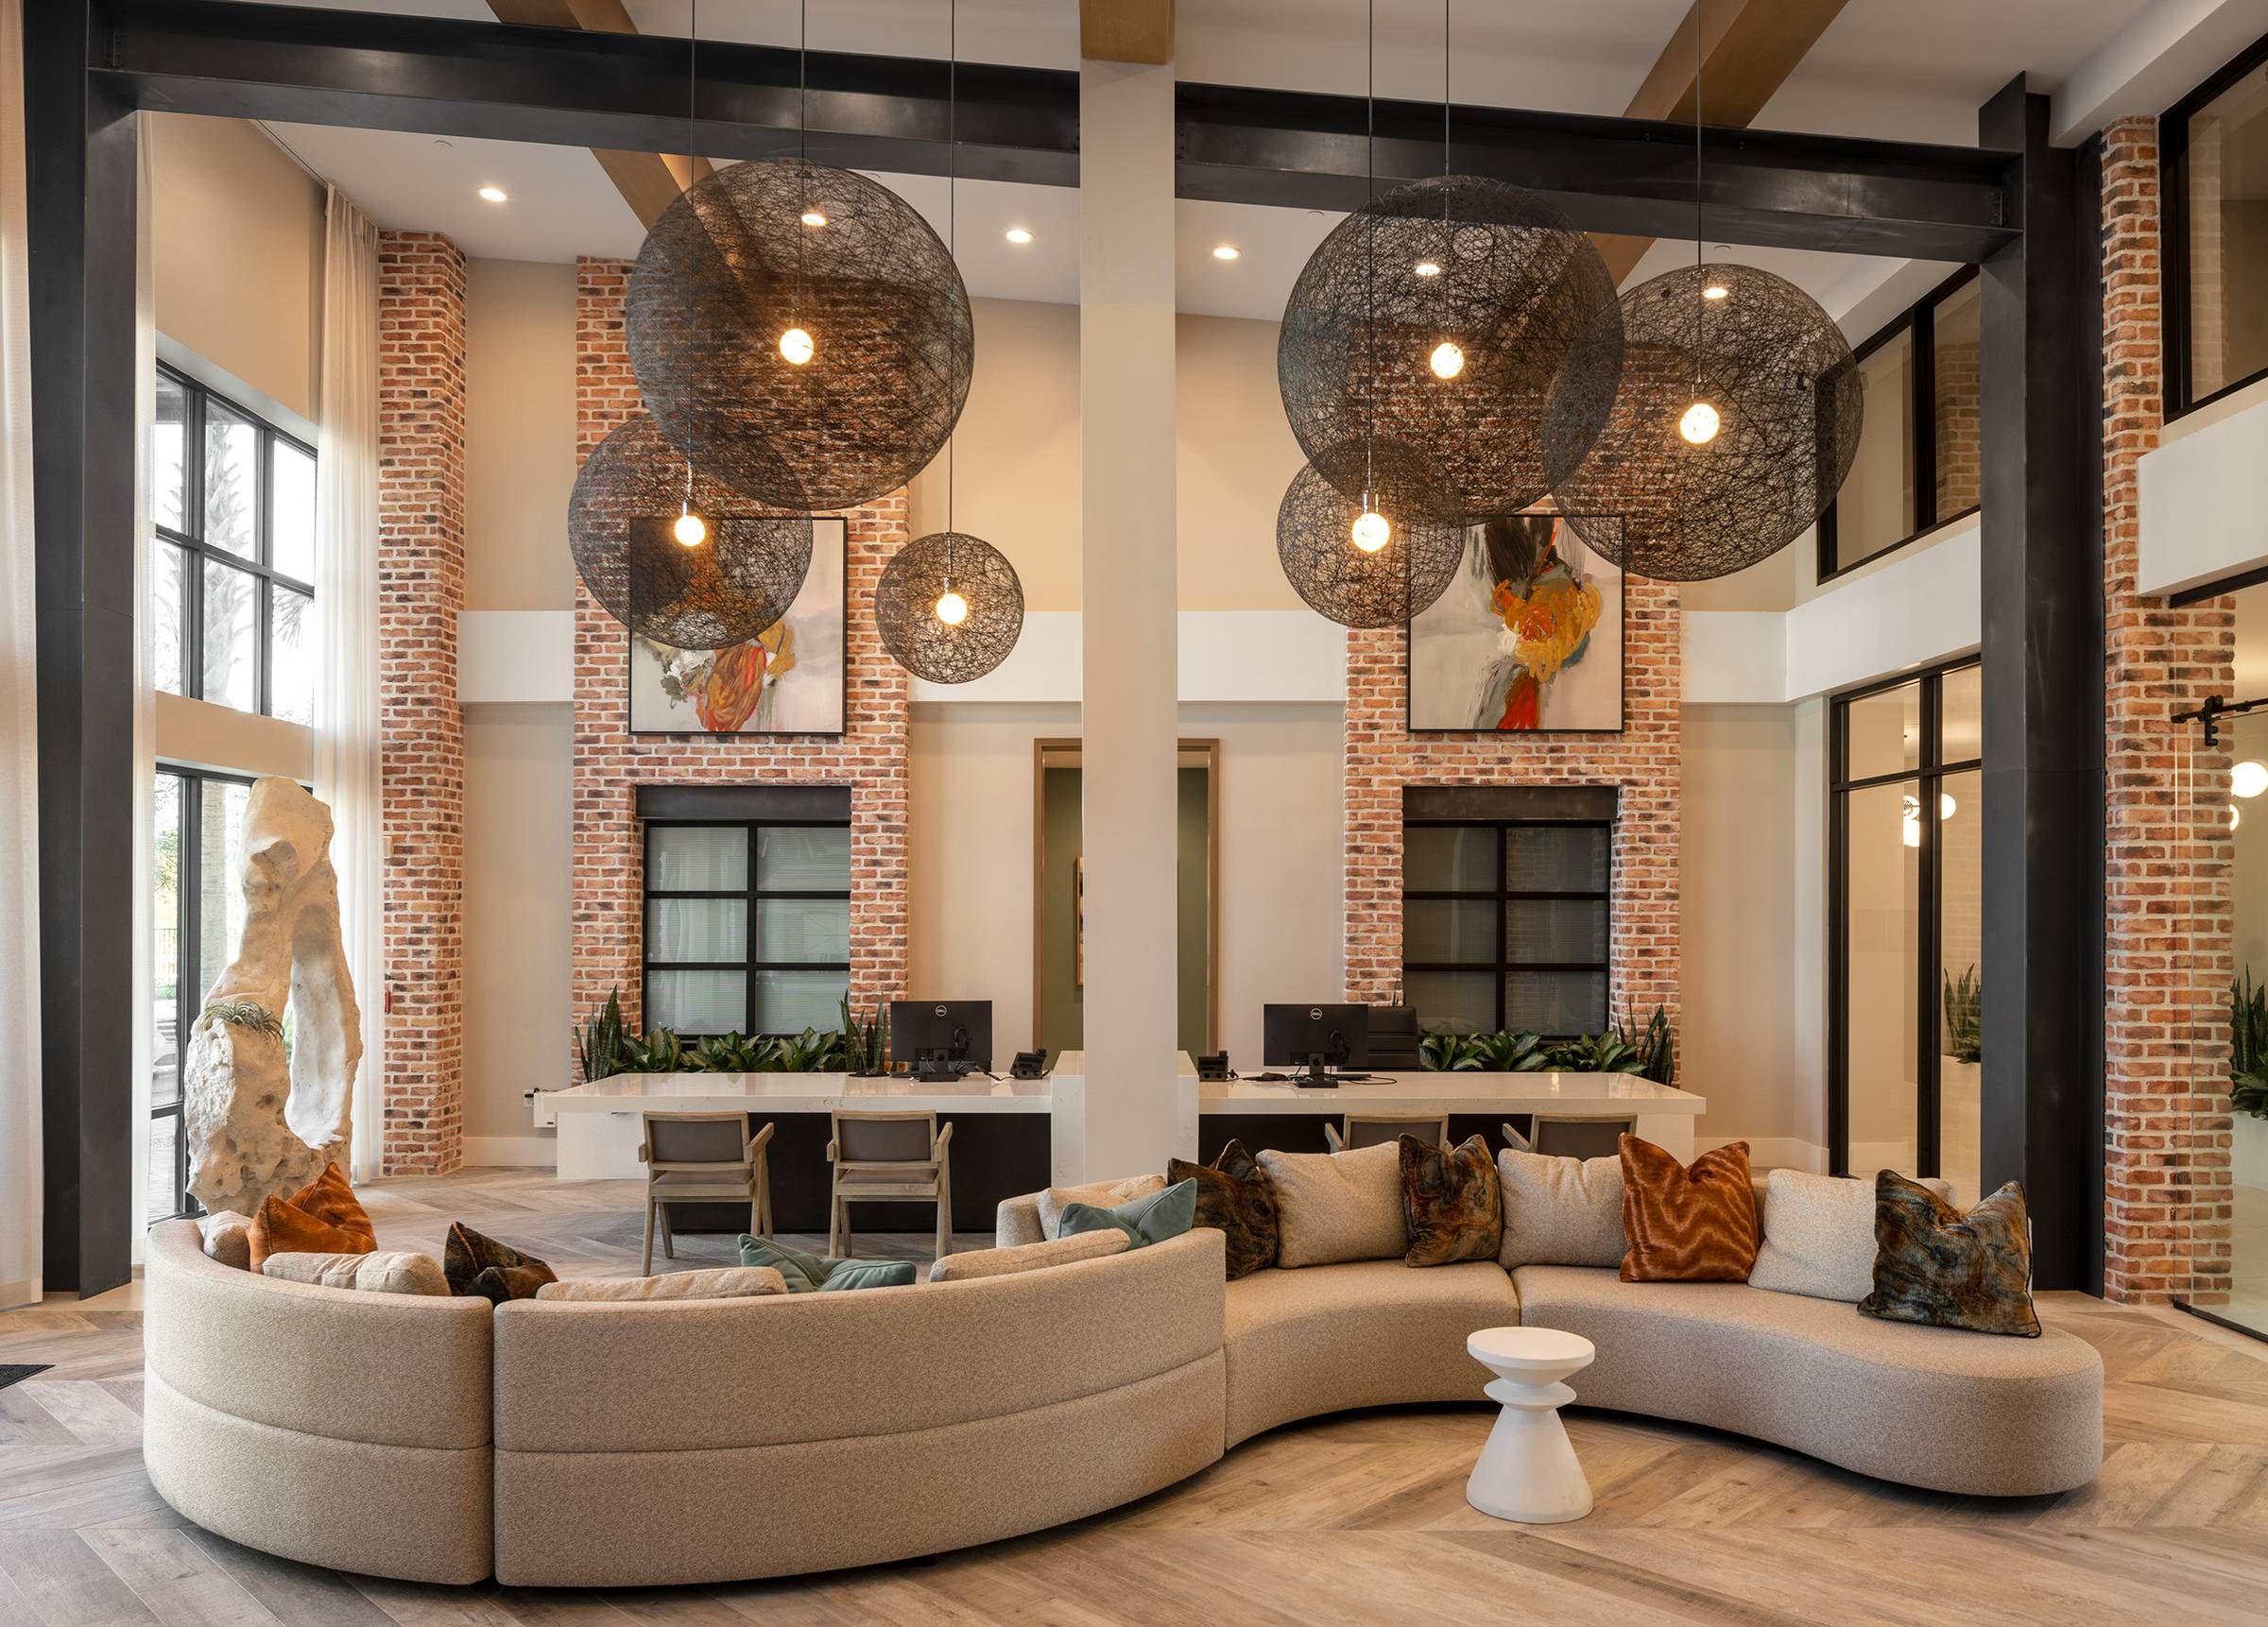 The lobby of Alta Winter Garden features a curvilinear sofa and spherical chandeliers, set against a backdrop of exposed brick and chic decor.